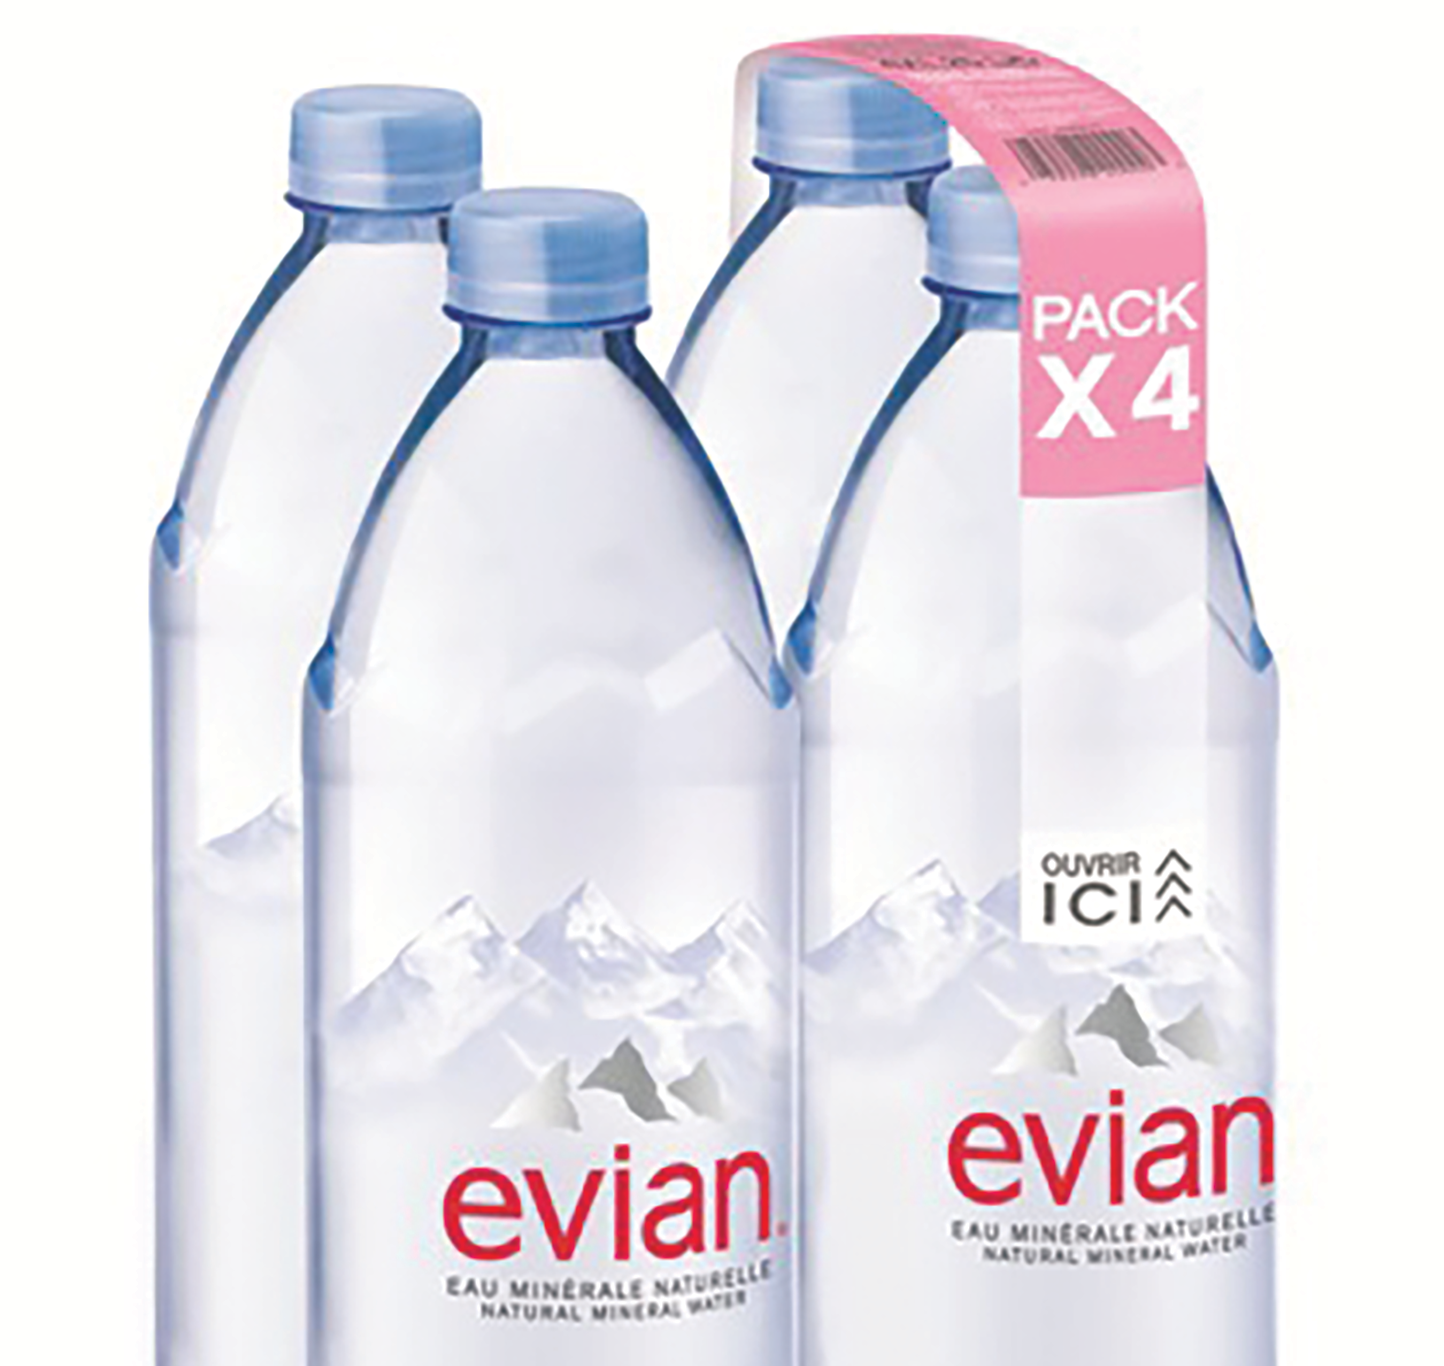 Evian's 'naked' bottles are ready for launch | Packaging World